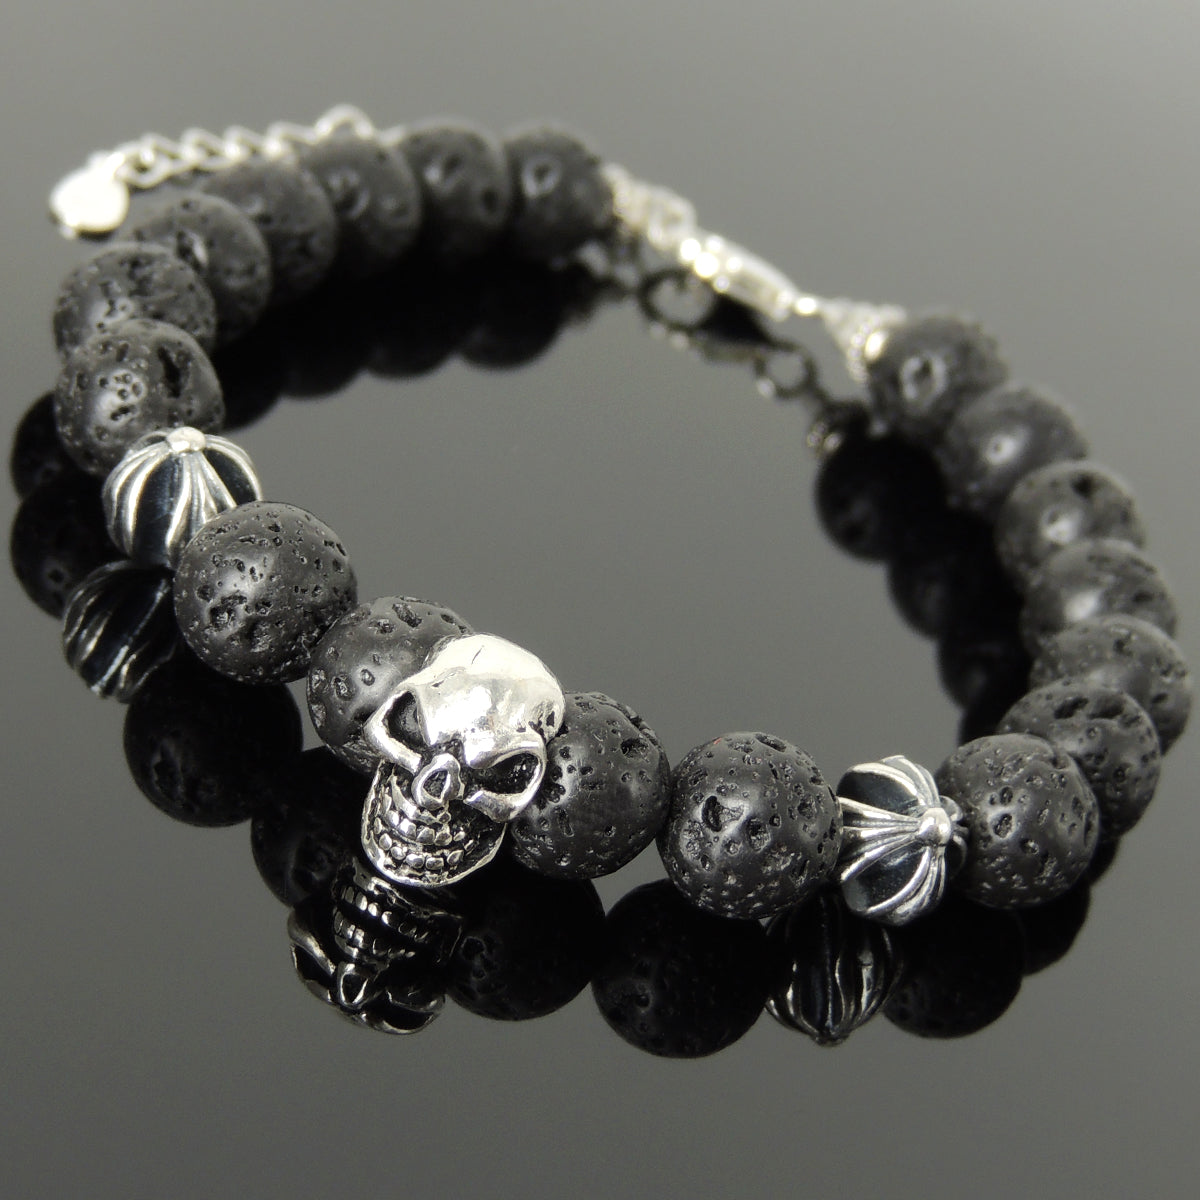 Spiritual Skull & Cross Clasp Bracelet with Healing Yoga Enhancement Lava Rock 8mm Stones with Genuine S925 Sterling Silver Parts - BR1479